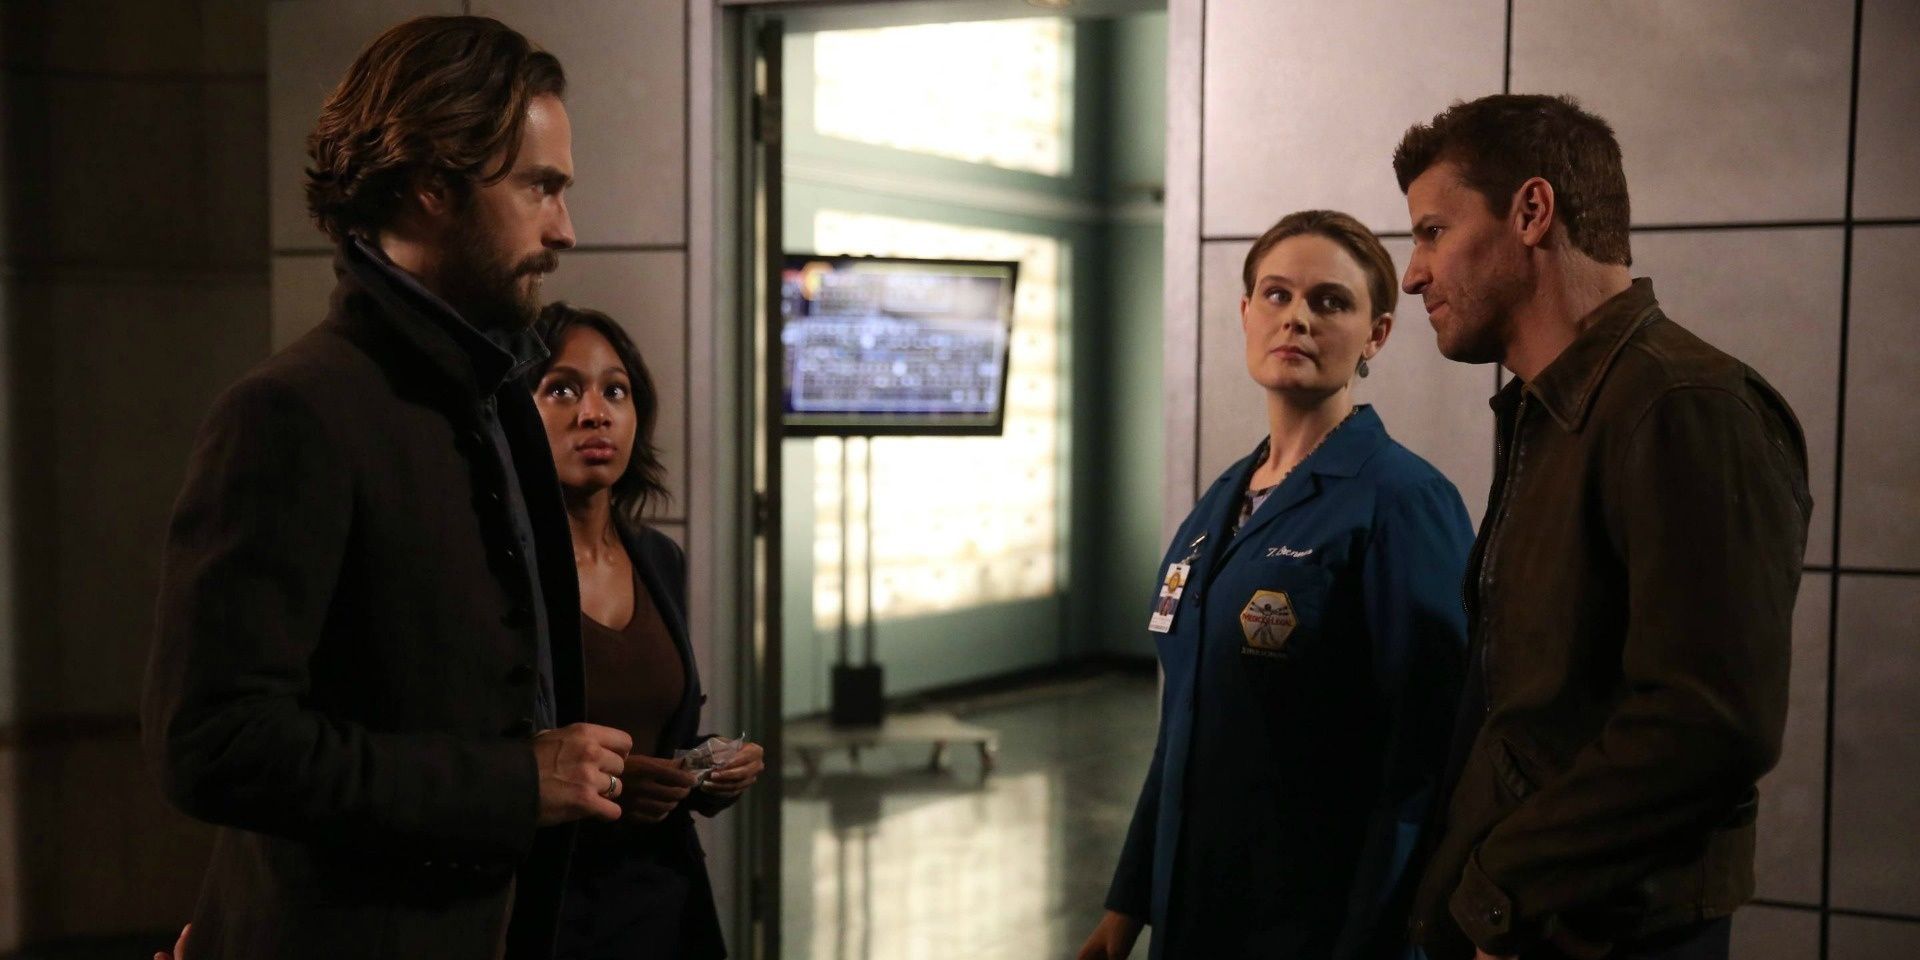 The casts of Sleepy Hollow and Bones stand in a hallway and talk